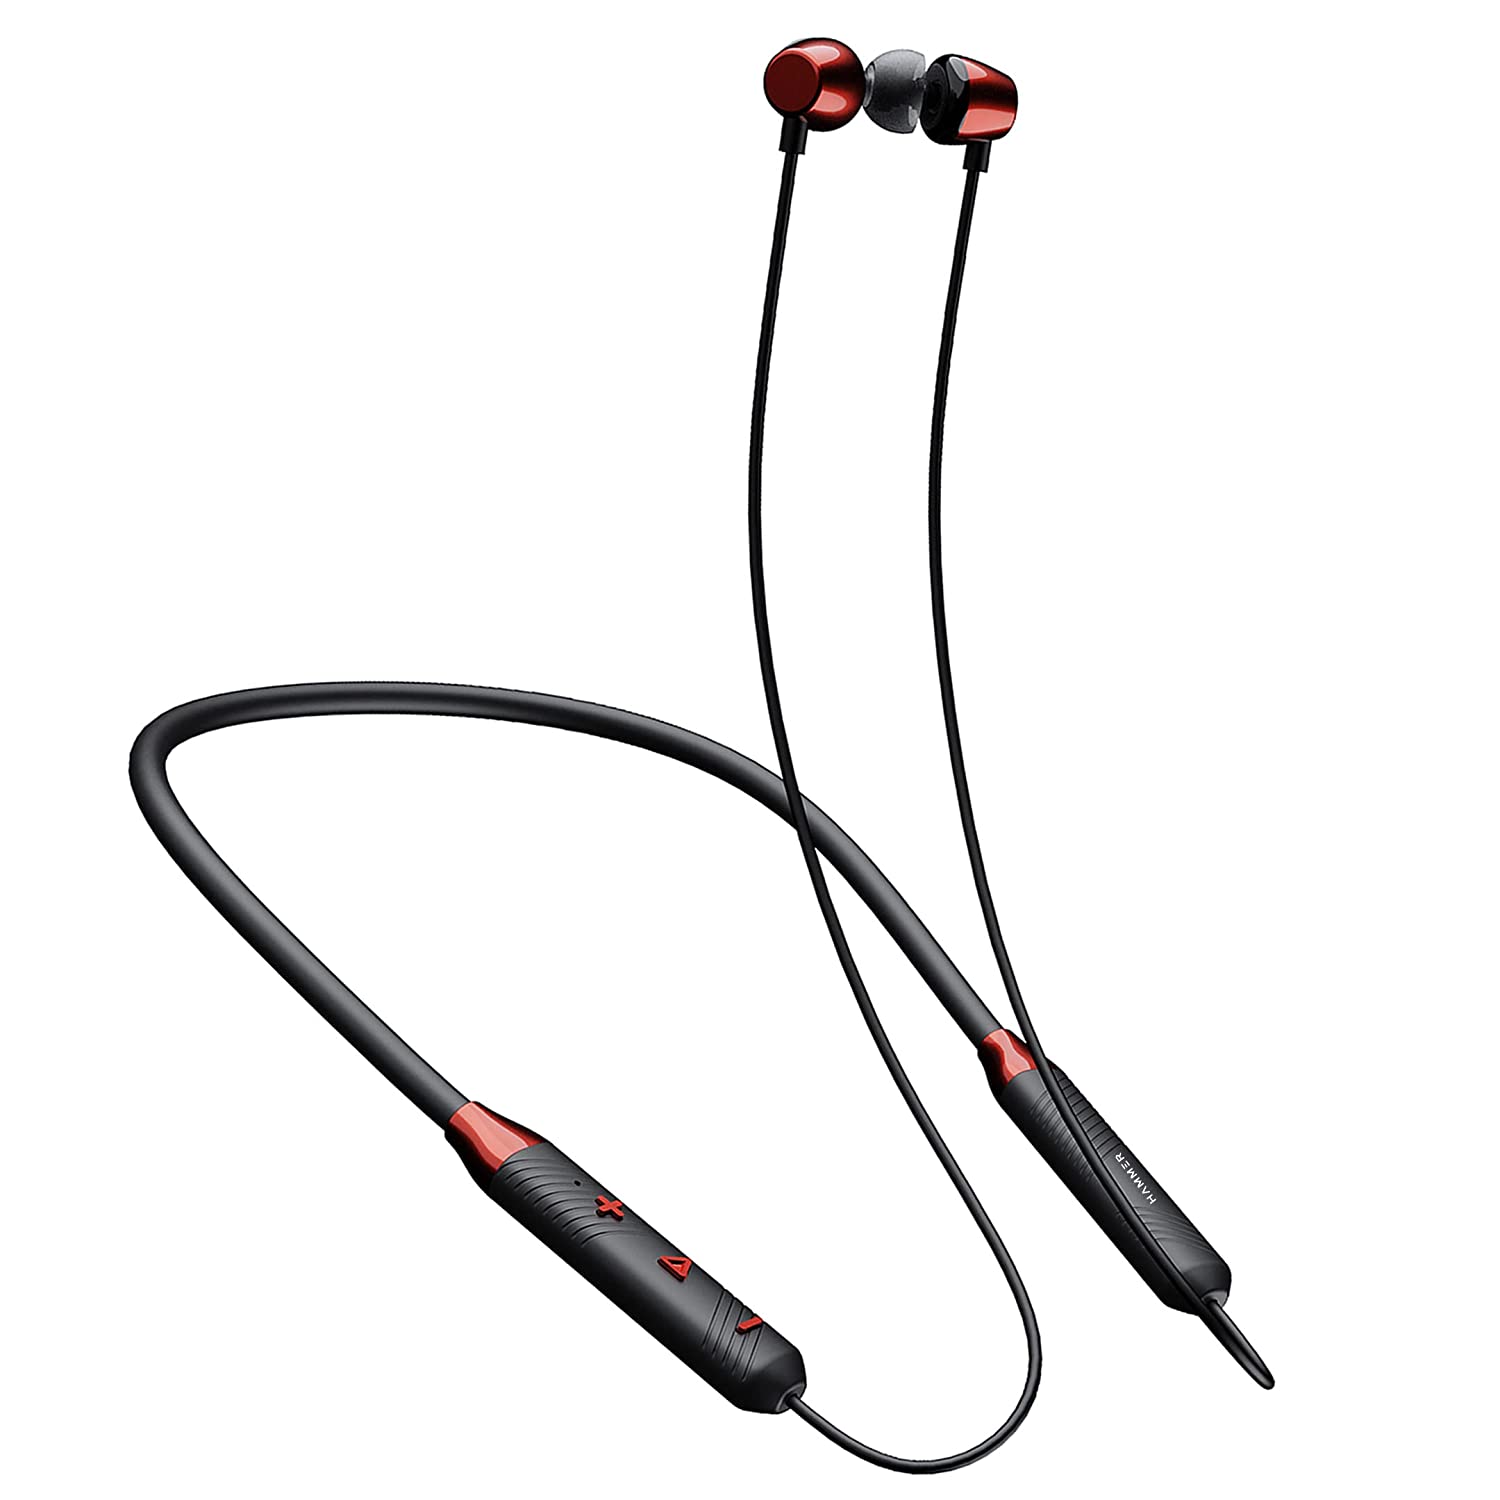 Hammer Sting 3.0 In-Ear Wireless Bluetooth Neckband Upto 30 hours Playback with IPX3 and Magnetic Eartips